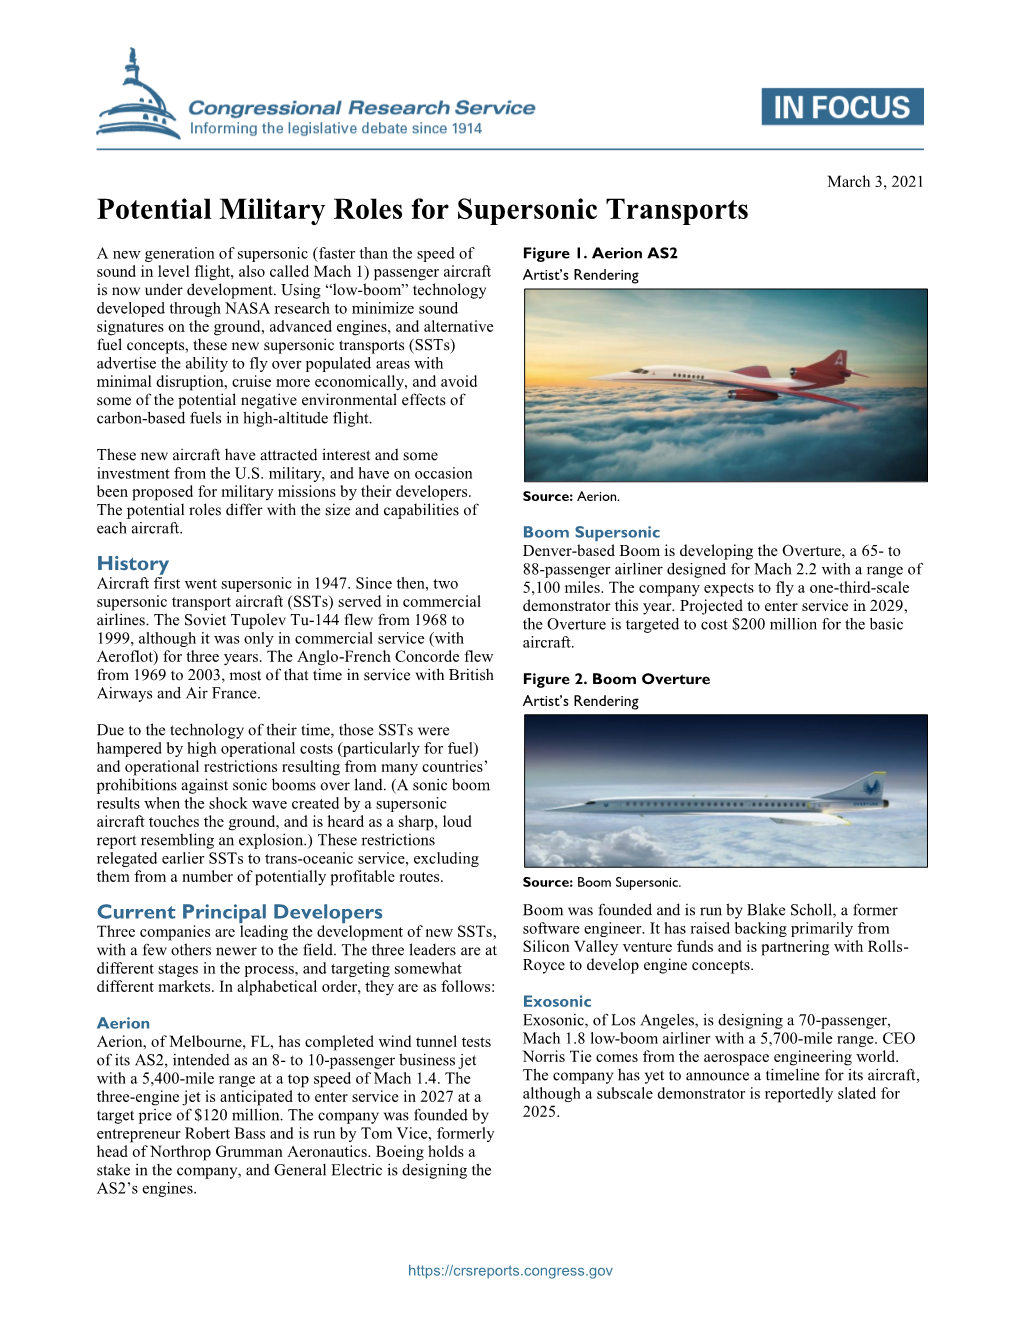 Potential Military Roles for Supersonic Transports